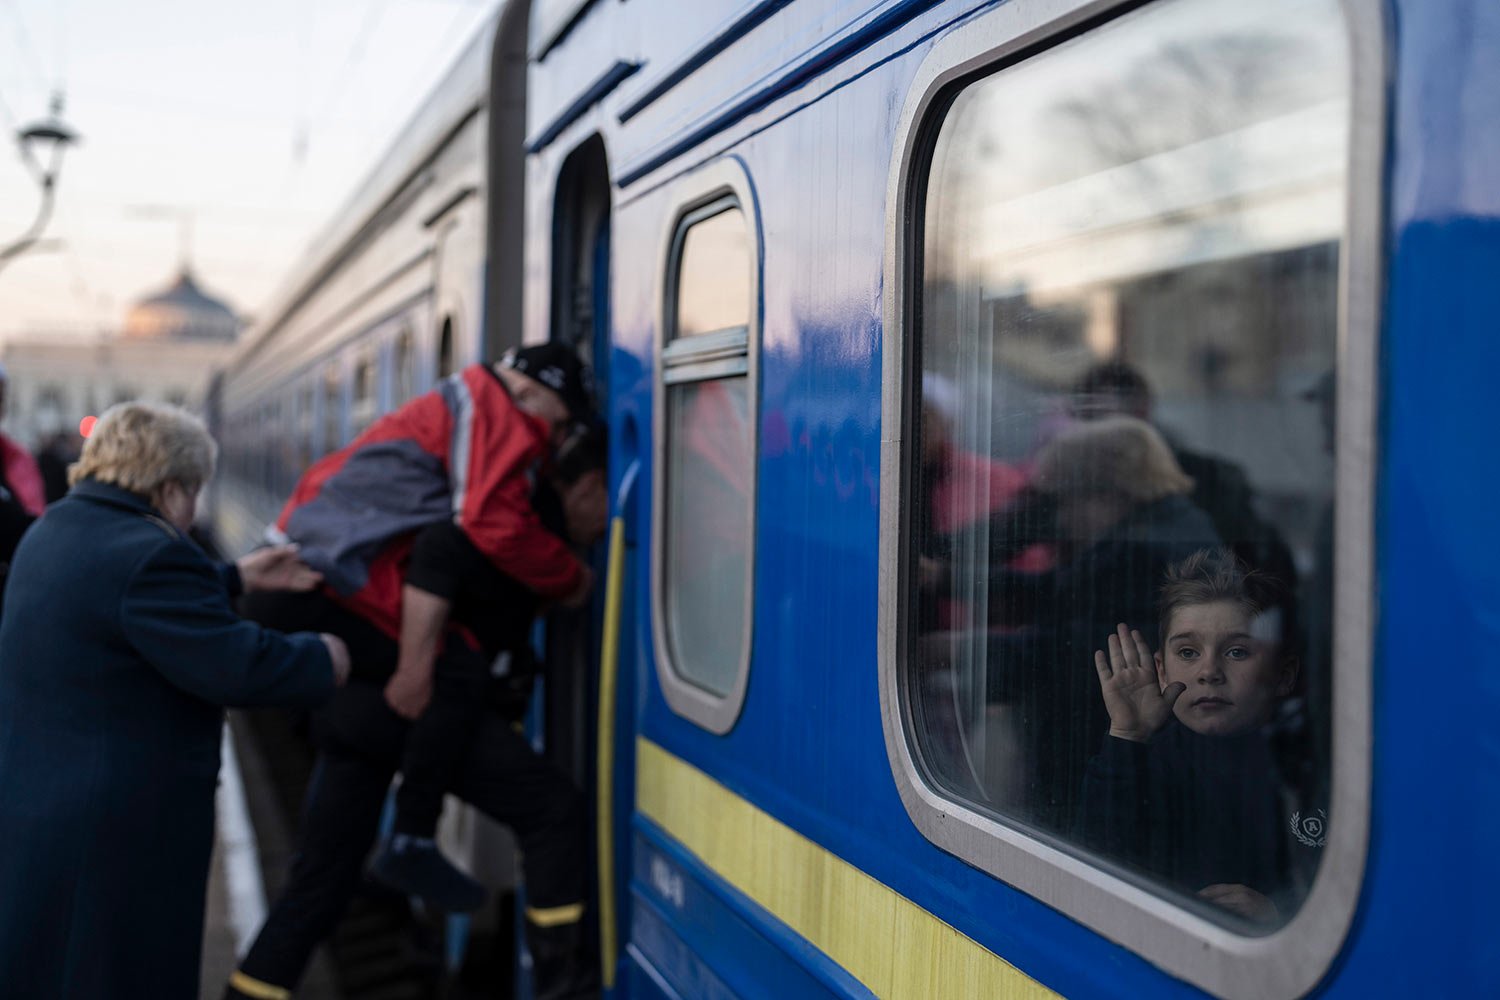  A child waves through the window of a train as people step on at the train station in Odesa, southern Ukraine, on Wednesday, March 23, 2022. (AP Photo/Petros Giannakouris) 